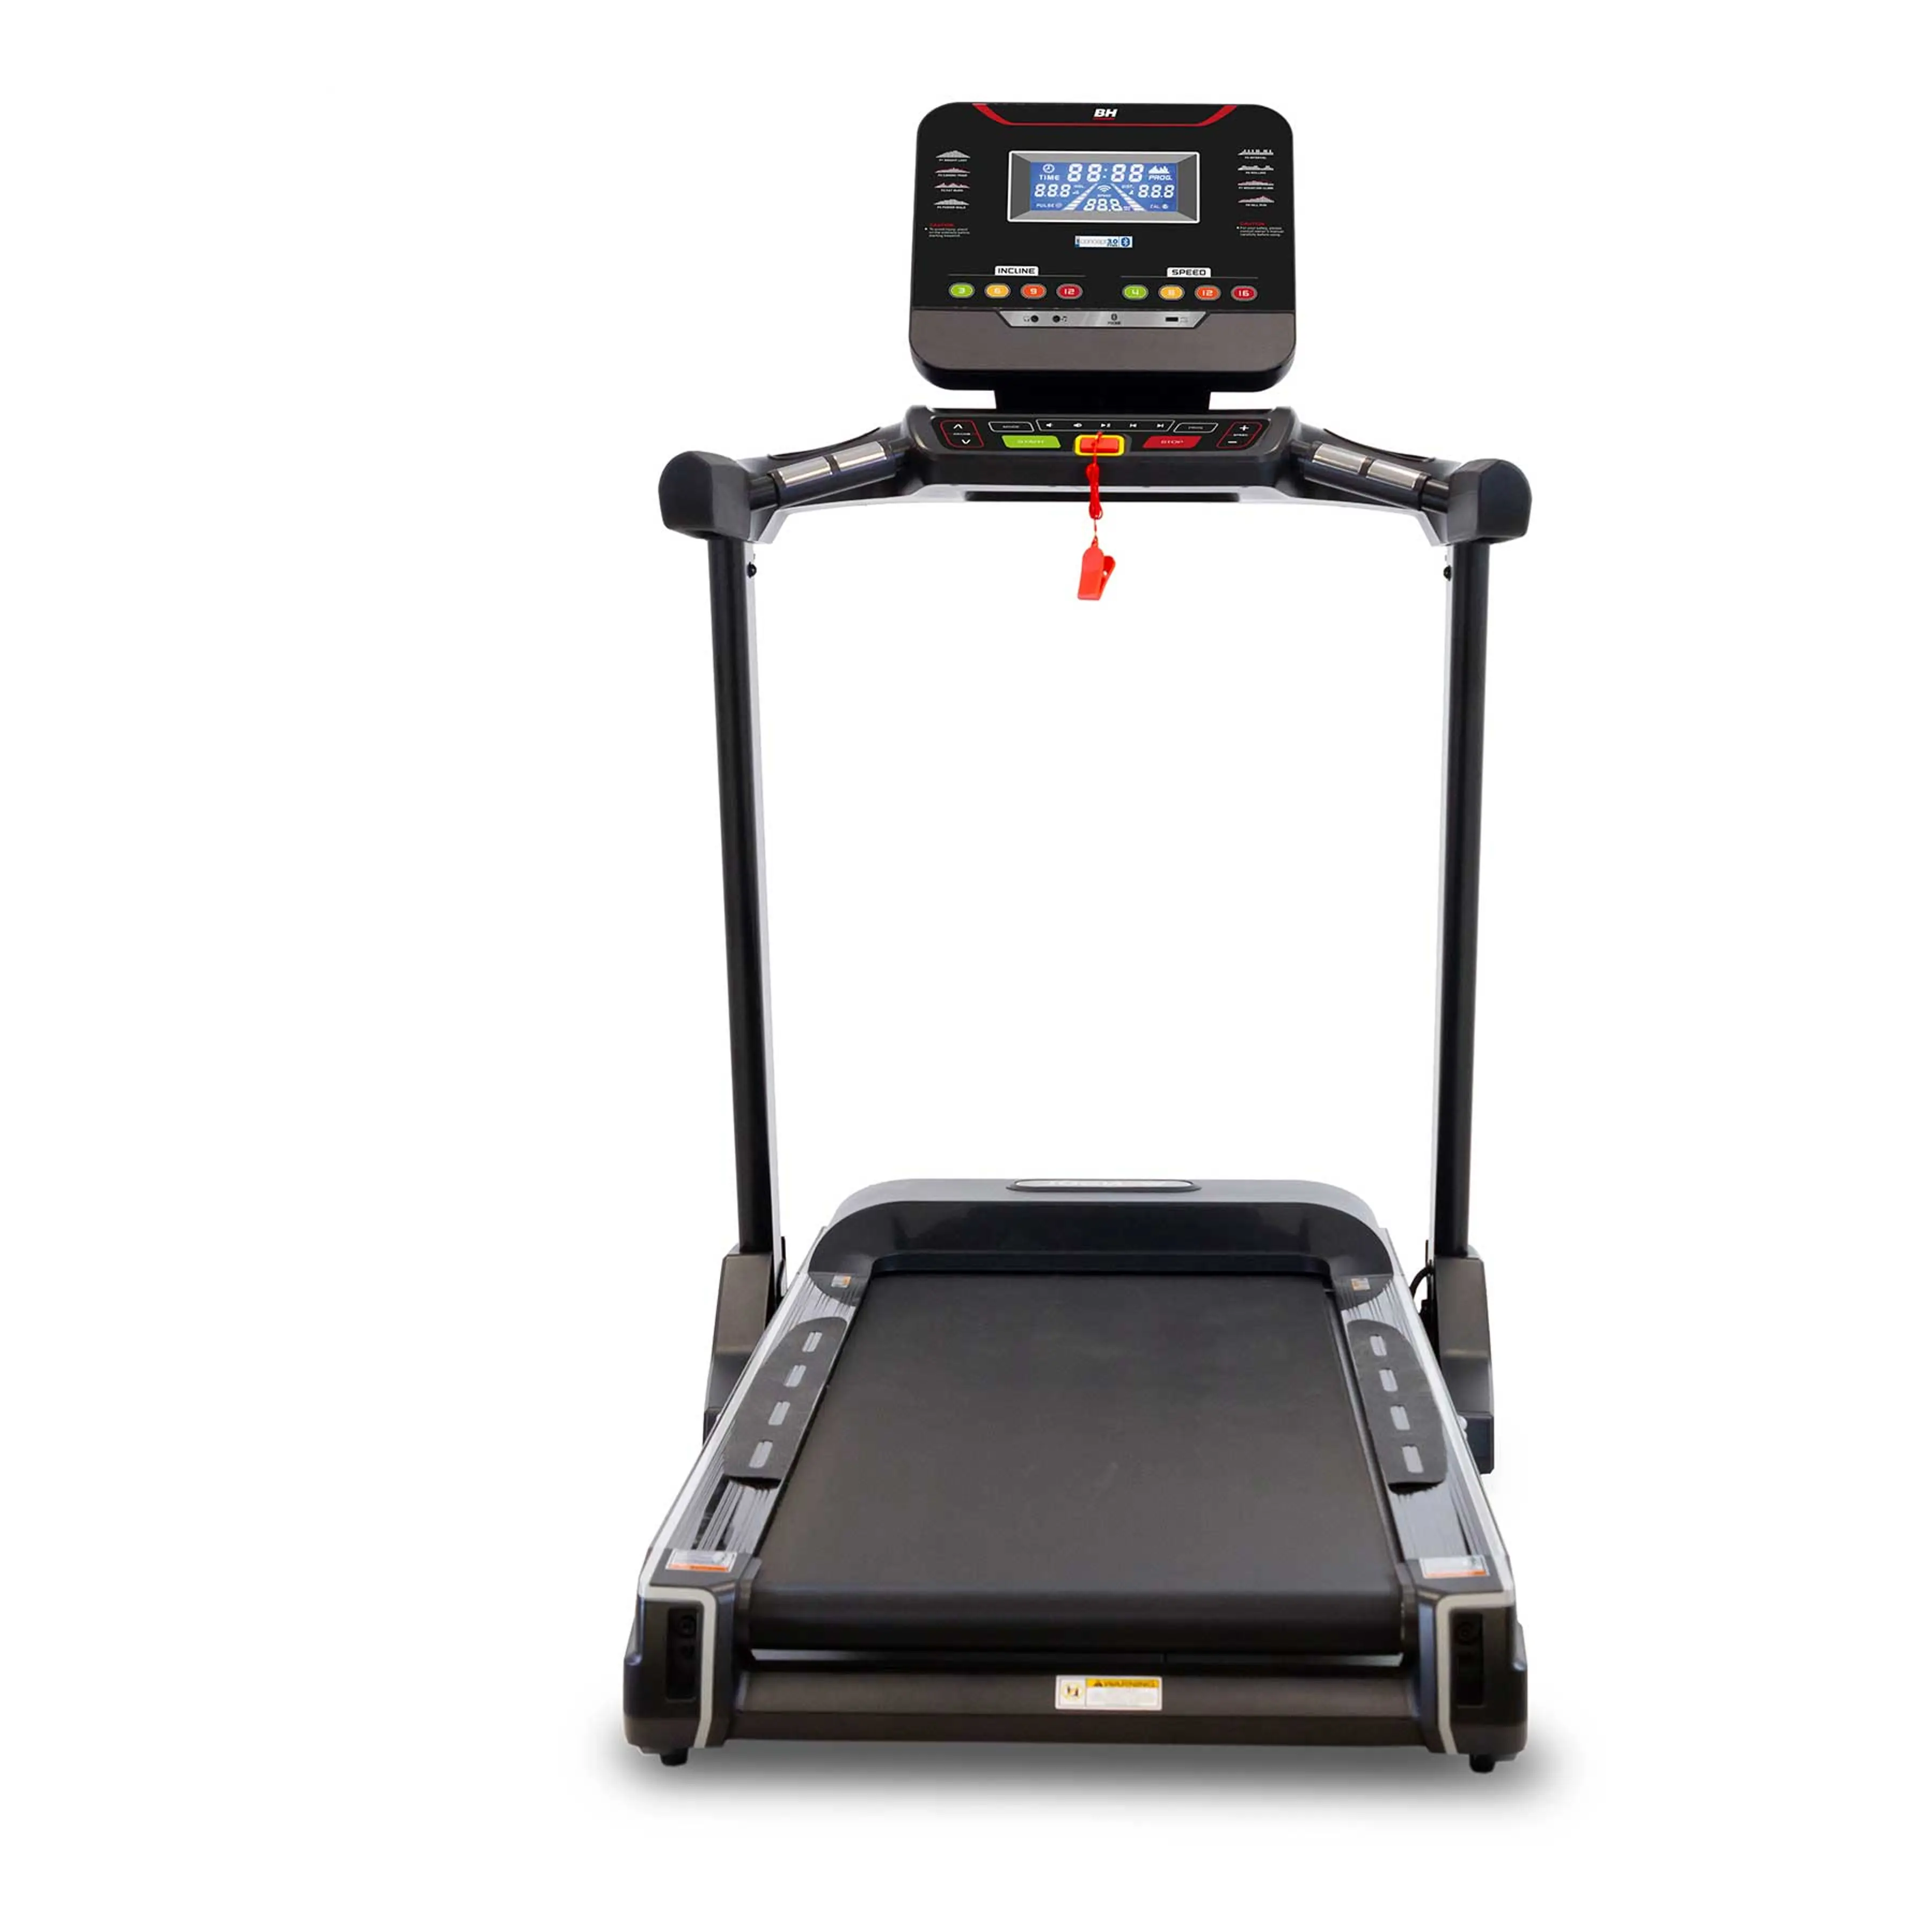 Bh Fitness Home Use Treadmill 3.5hp- Model RS800